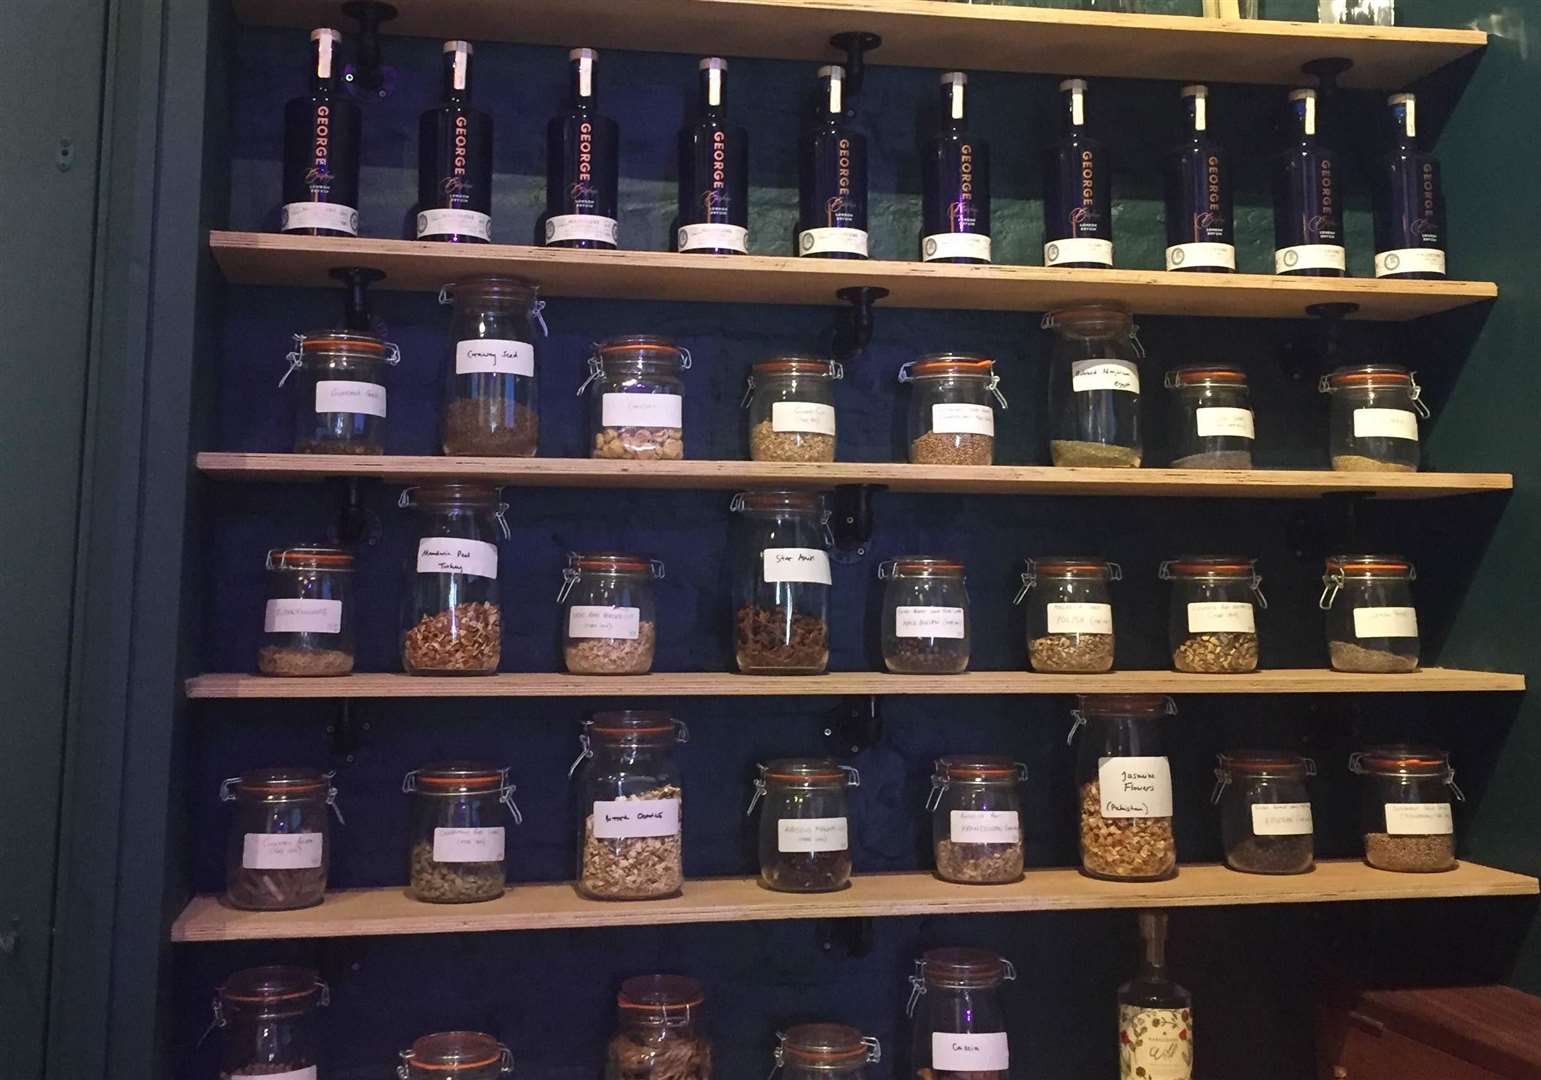 Jars of botanicals line the shelves in the experience room